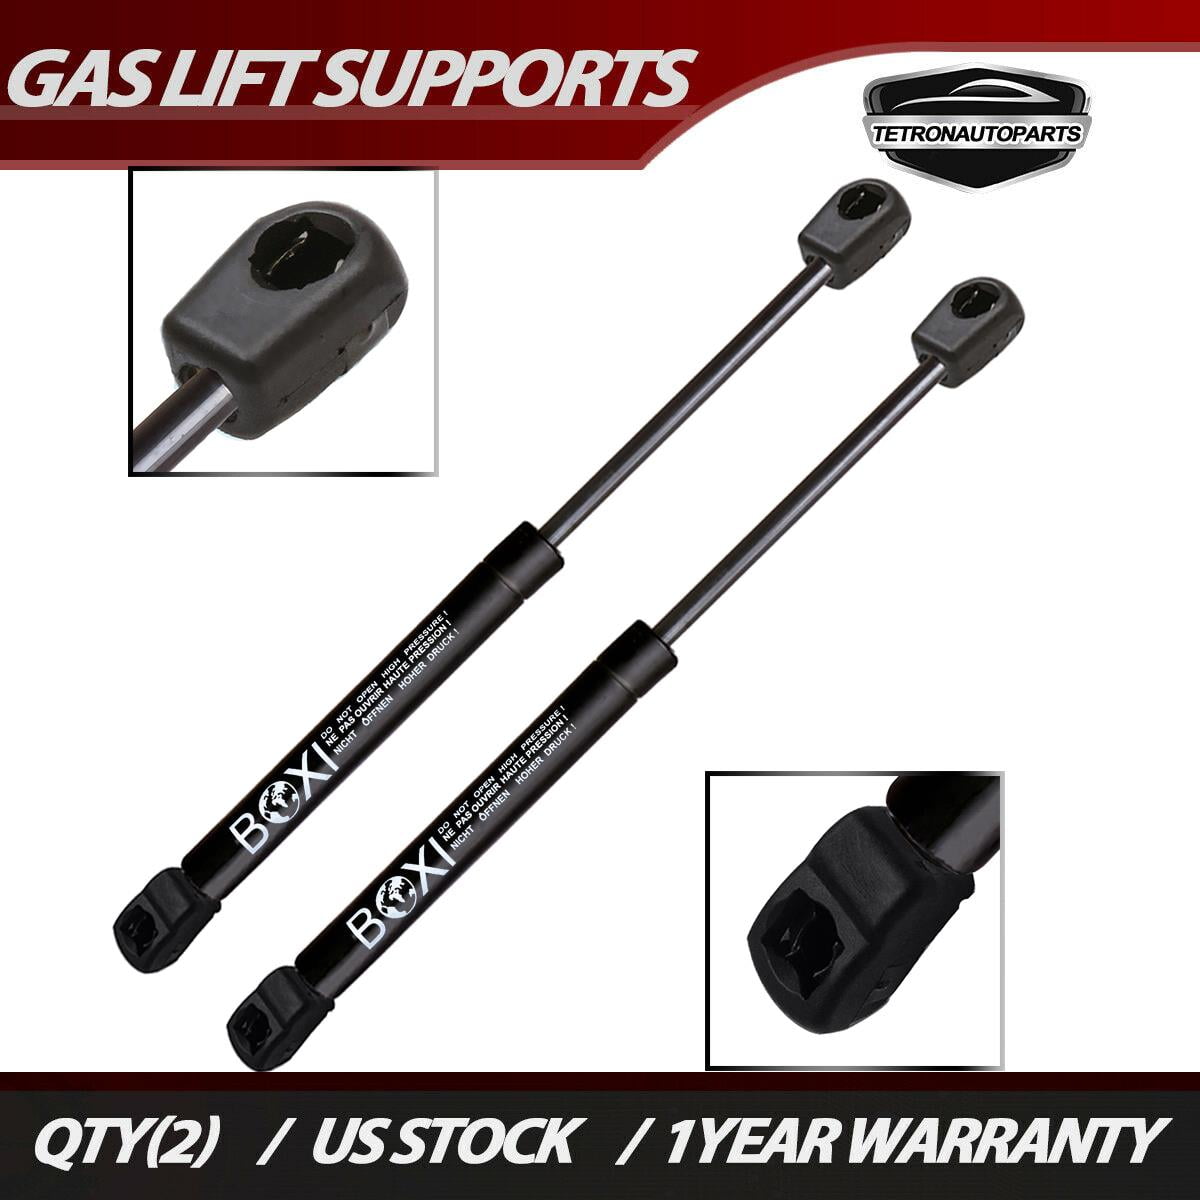 ML350 2003 To 2005 ML500 2002 To 2007 ML430 1998 To 2001 ML55 AMG 2000 To 2003 SG203009 BOXI 2pcs Tailgate Gas Charged Lift Supports Fit Mercedes-Benz ML320 1998 To 2003